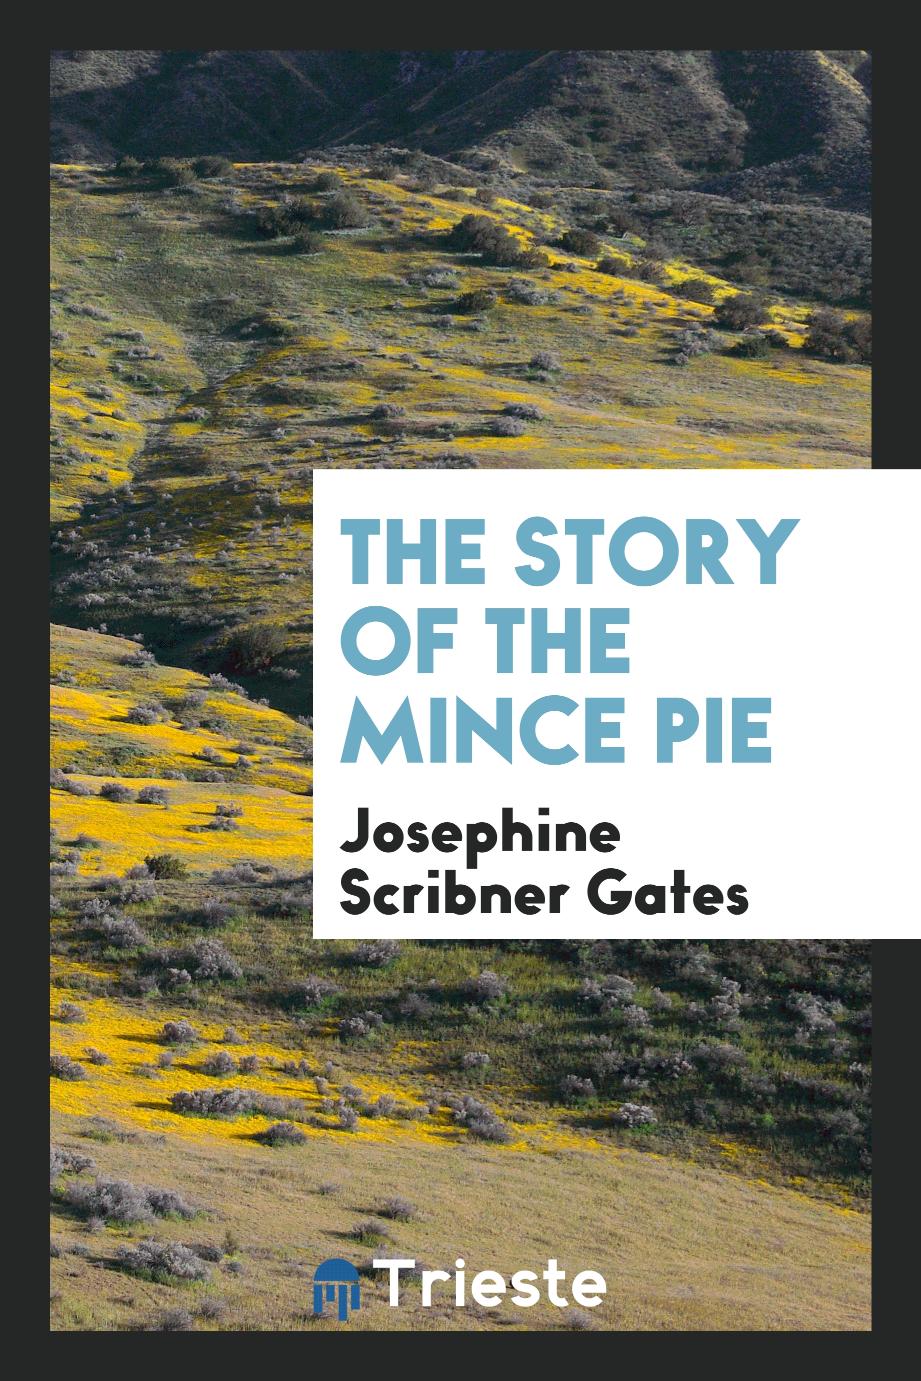 The Story of the mince pie